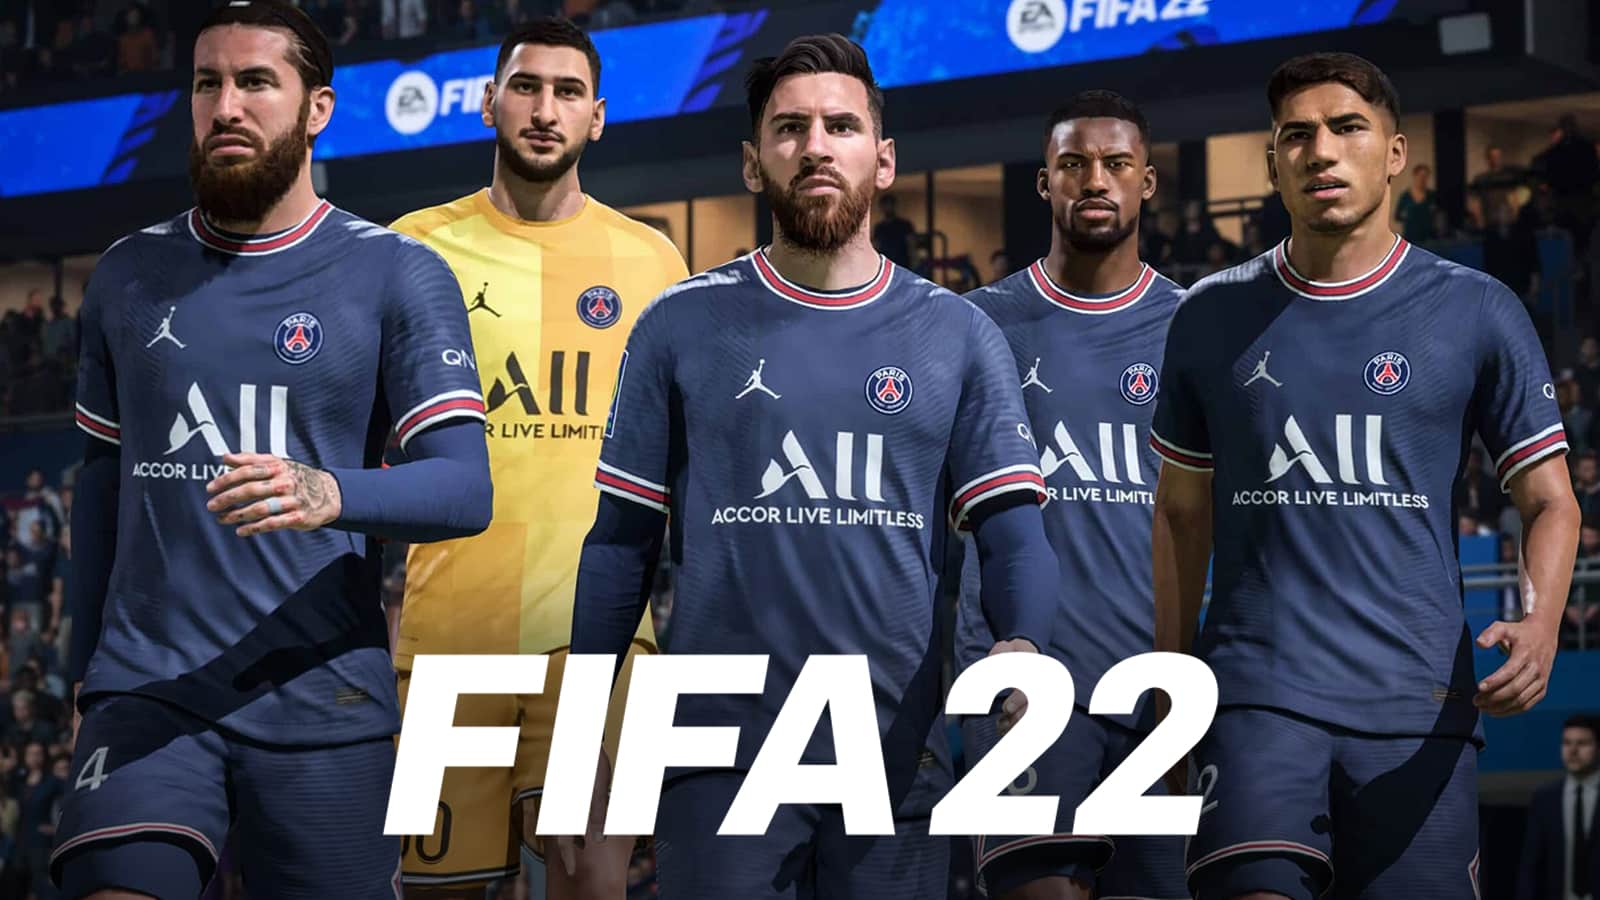 download fifa 22 crack for pc